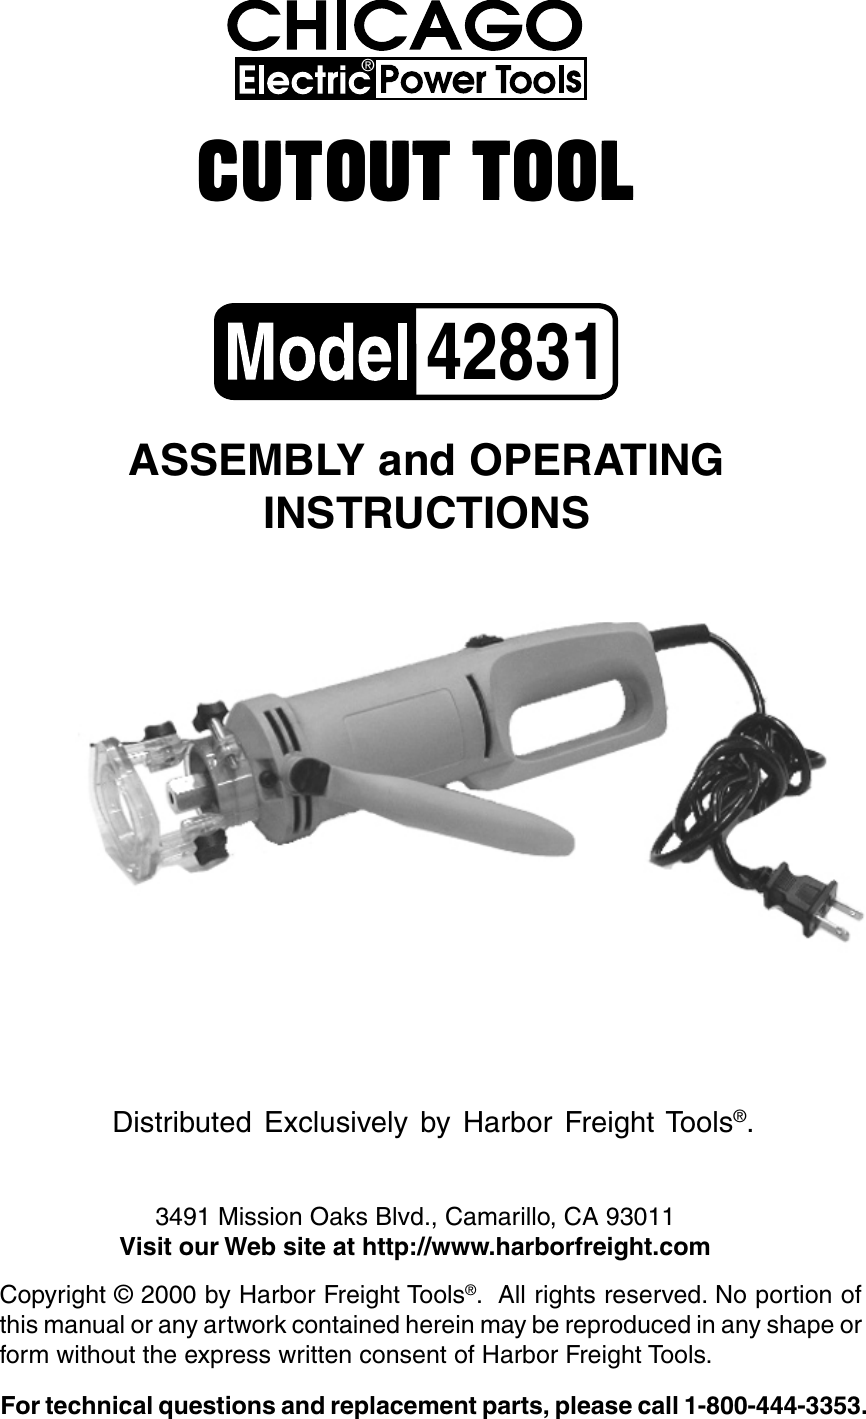 Page 1 of 8 - Harbor-Freight Harbor-Freight-3-5-Amp-Heavy-Duty-Electric-Cutout-Tool-Product-Manual- 42831  Harbor-freight-3-5-amp-heavy-duty-electric-cutout-tool-product-manual